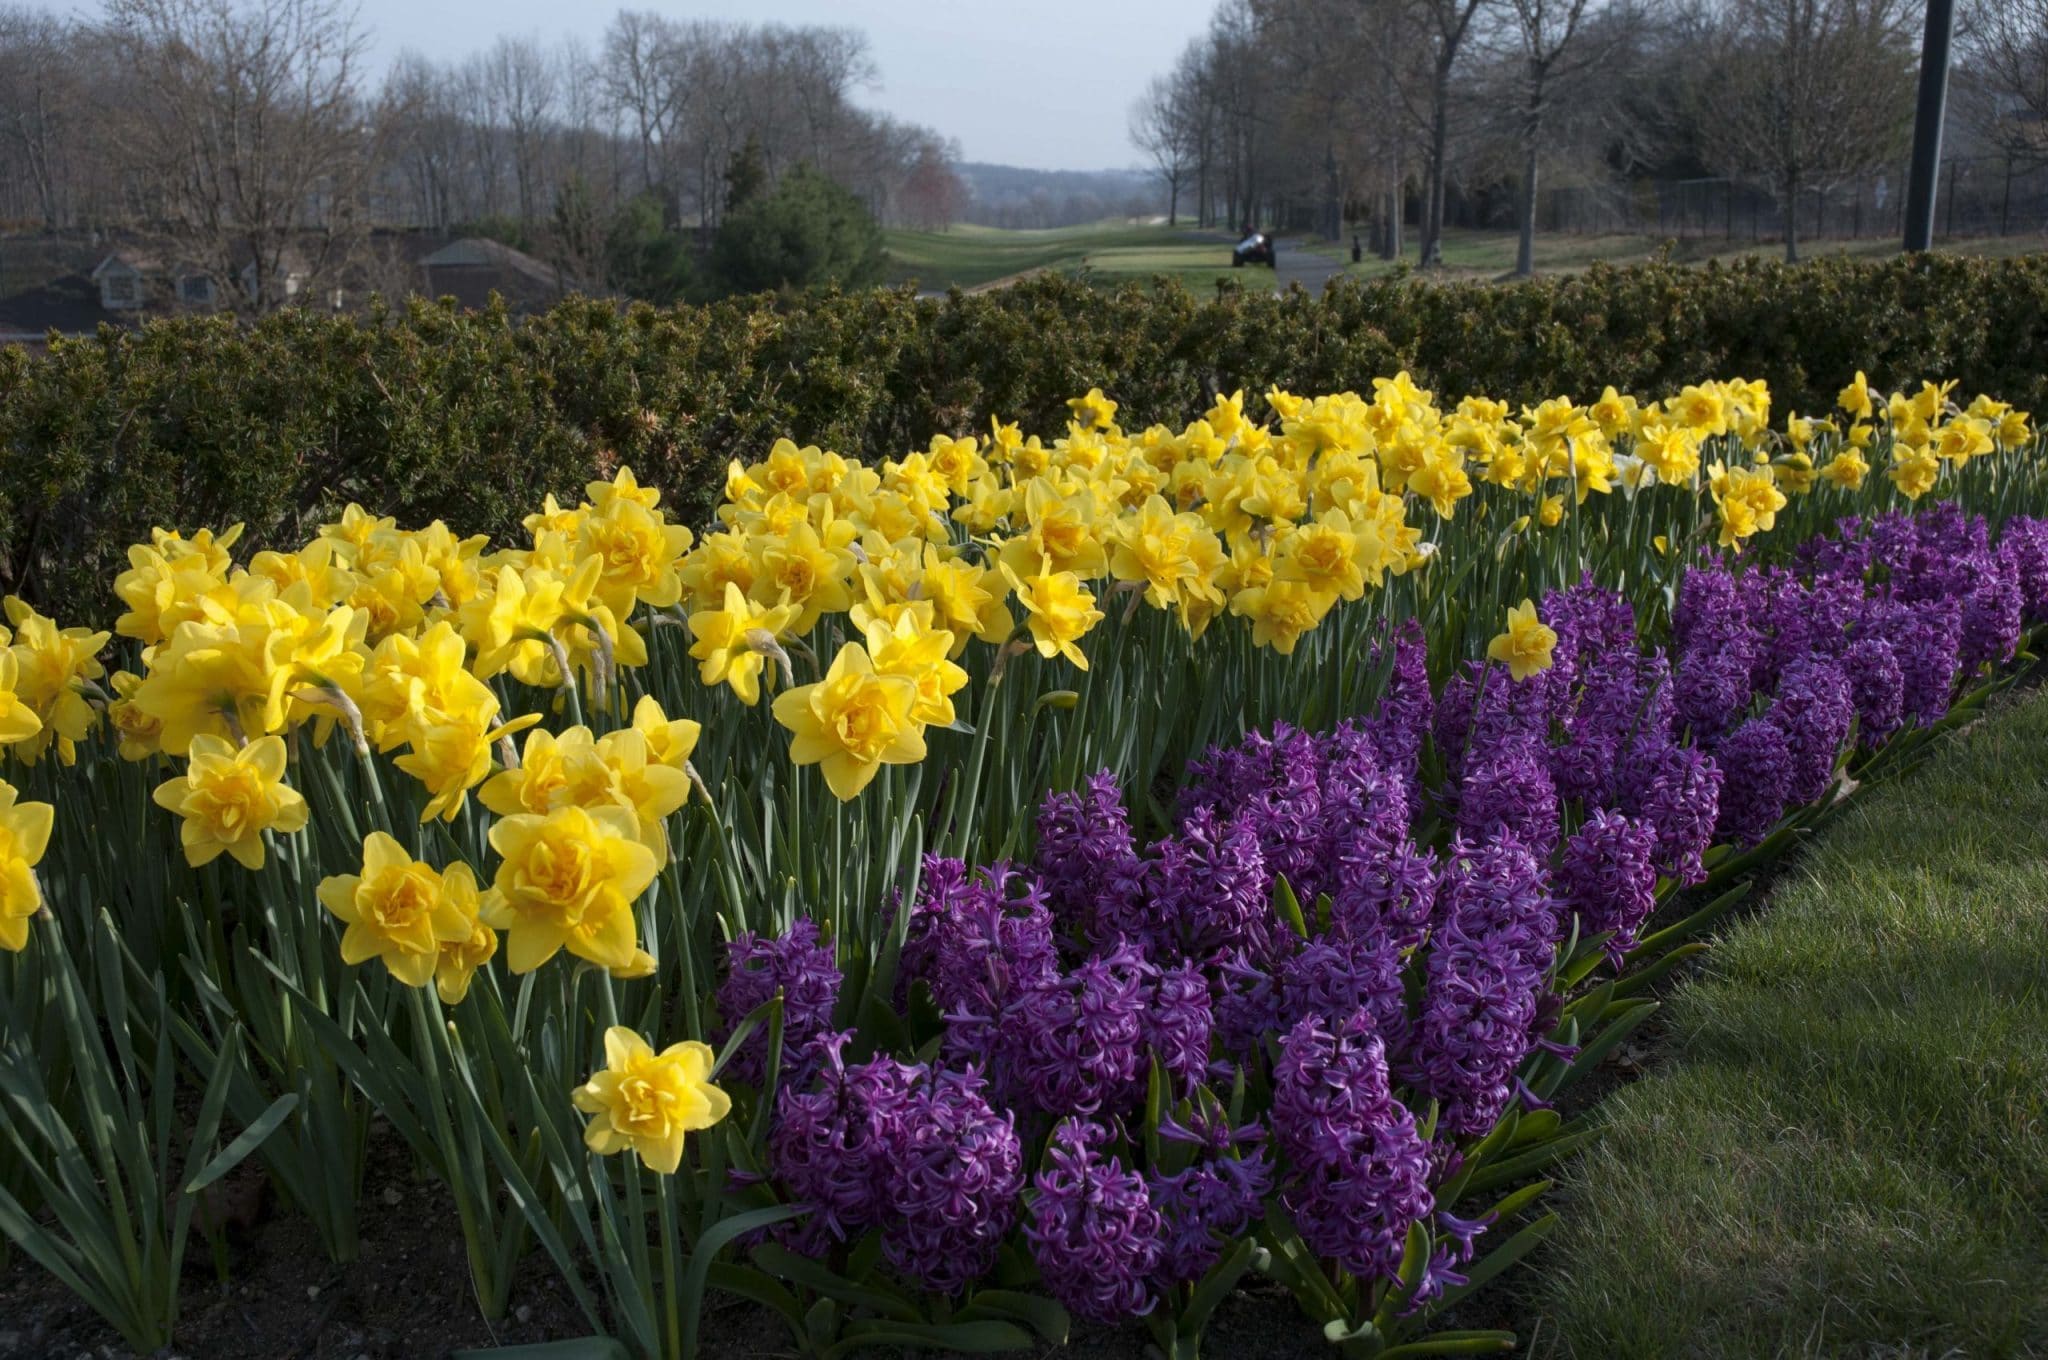 Daffodil Queen's Day and hyacinth Purple Sensation